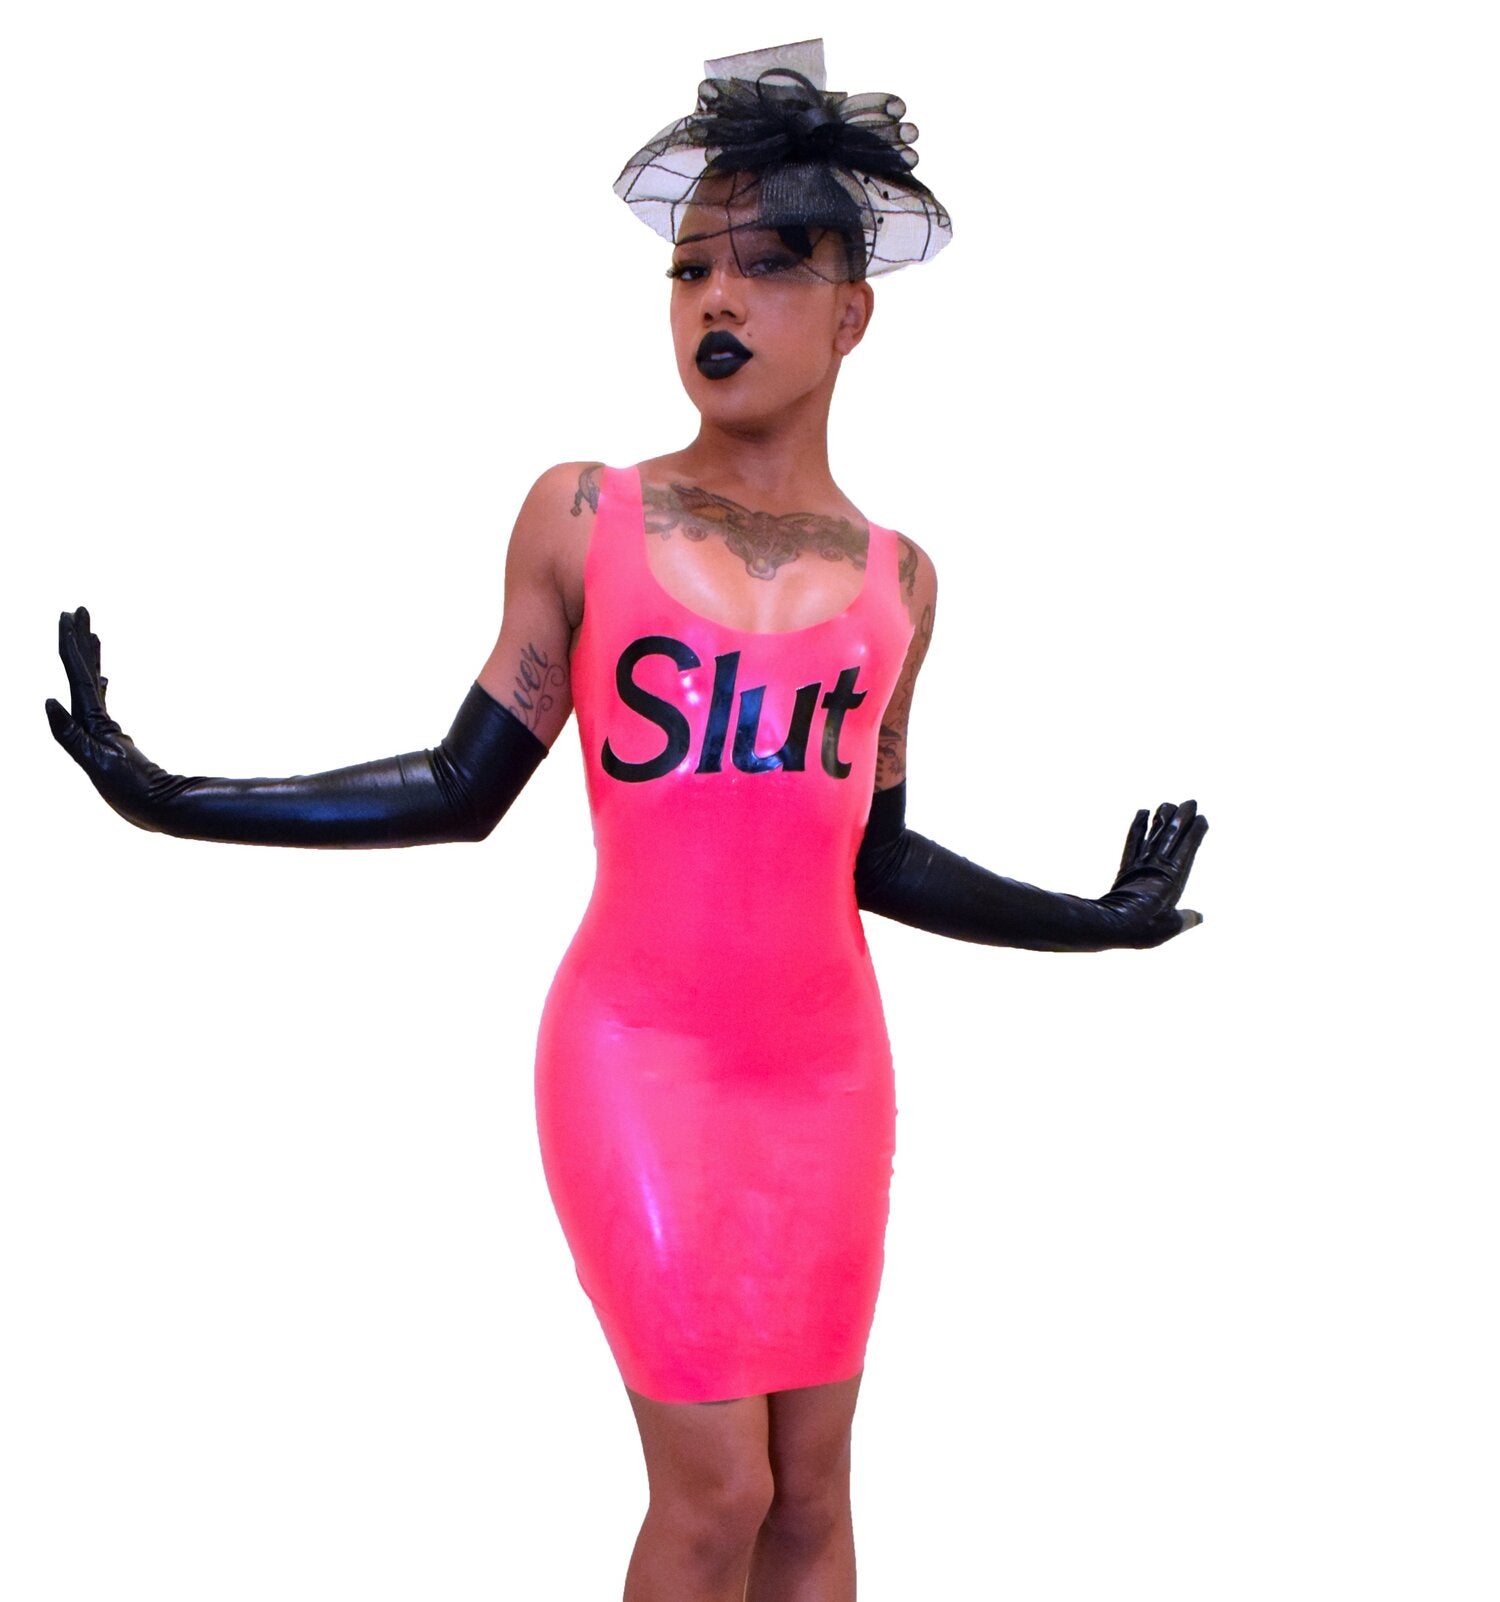 Model wearing neon pink slut dress with hat and long gloves